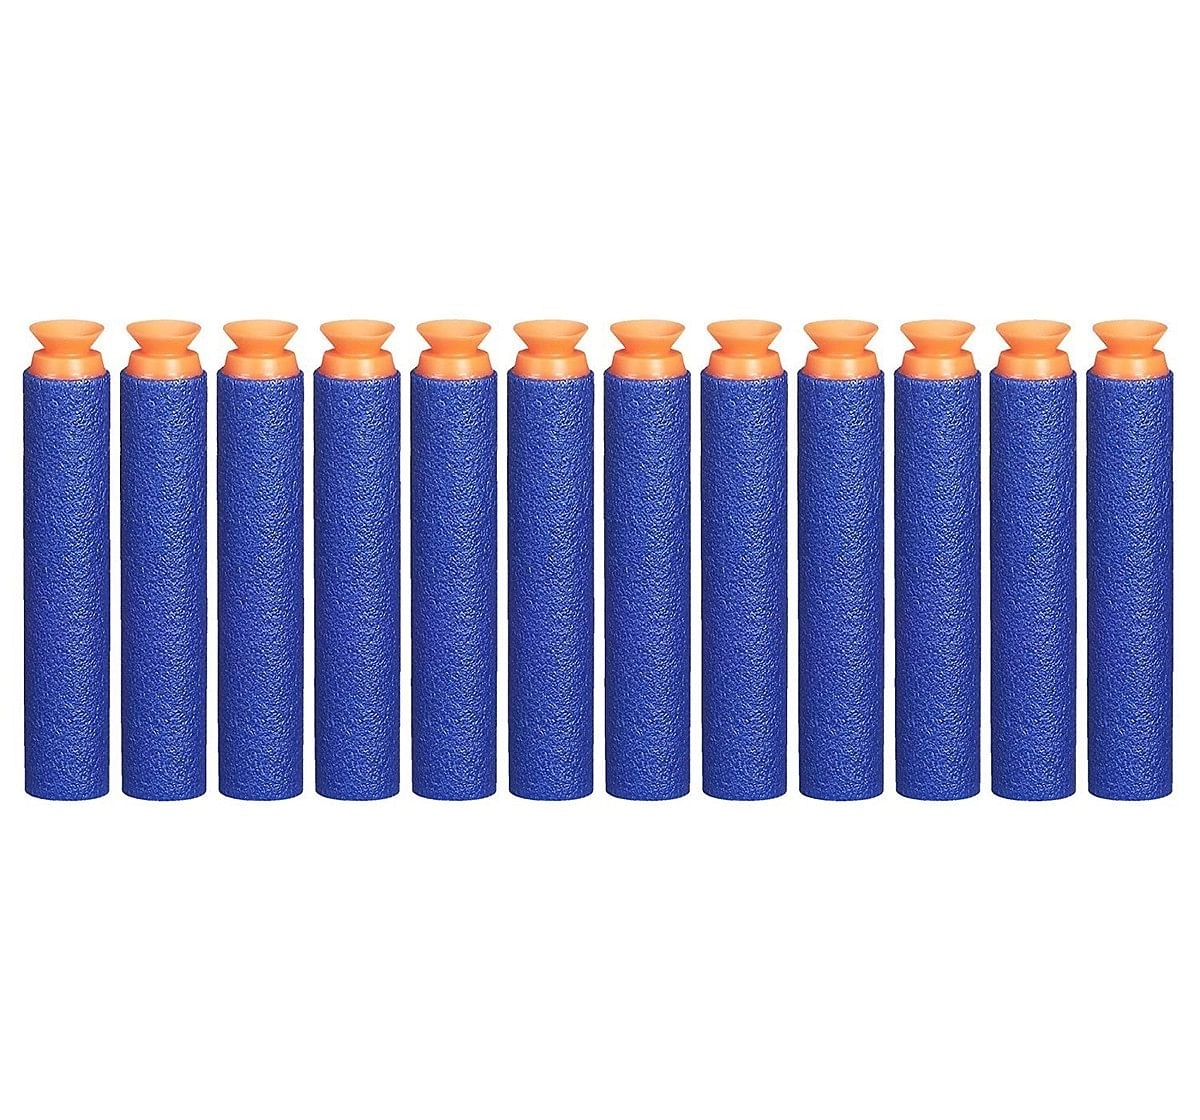  Nerf Suction Darts 12-Pack Refill For Nerf Elite Blasters - 8Y+ 